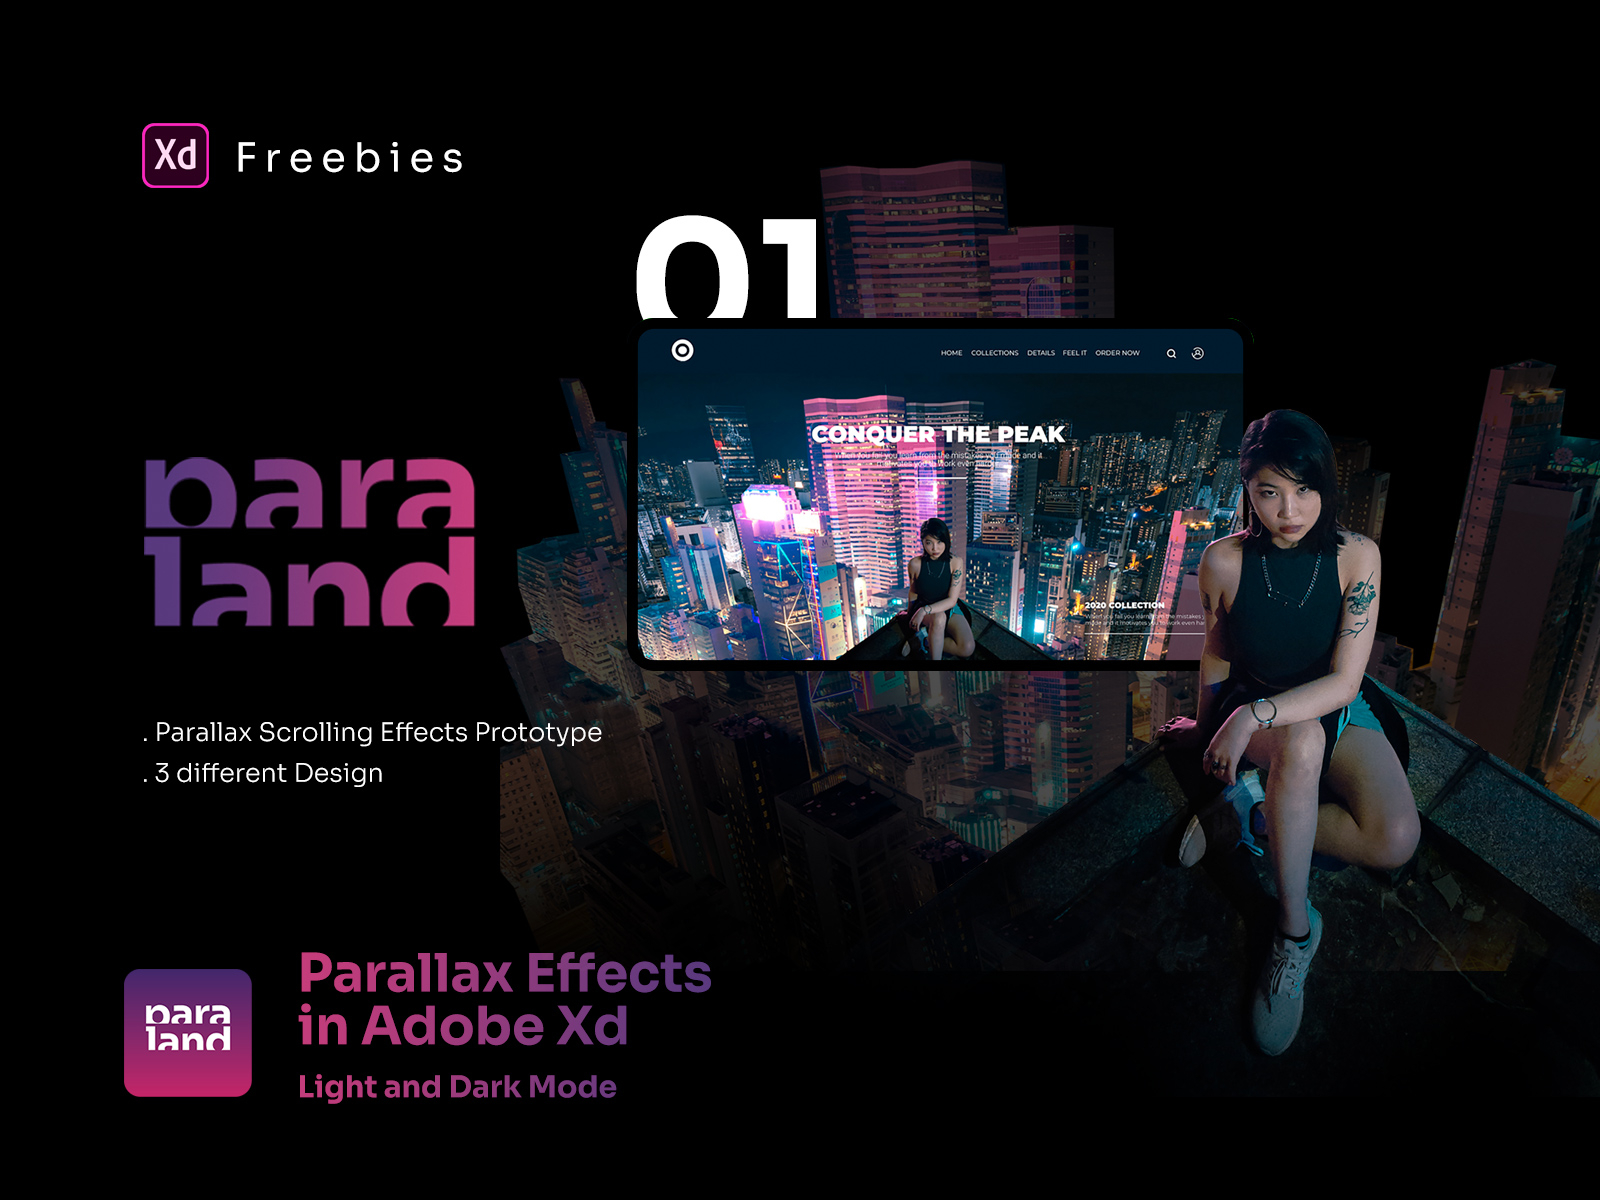 paraland-parallax-scrolling-effects-in-adobe-xd-freebies-by-amir